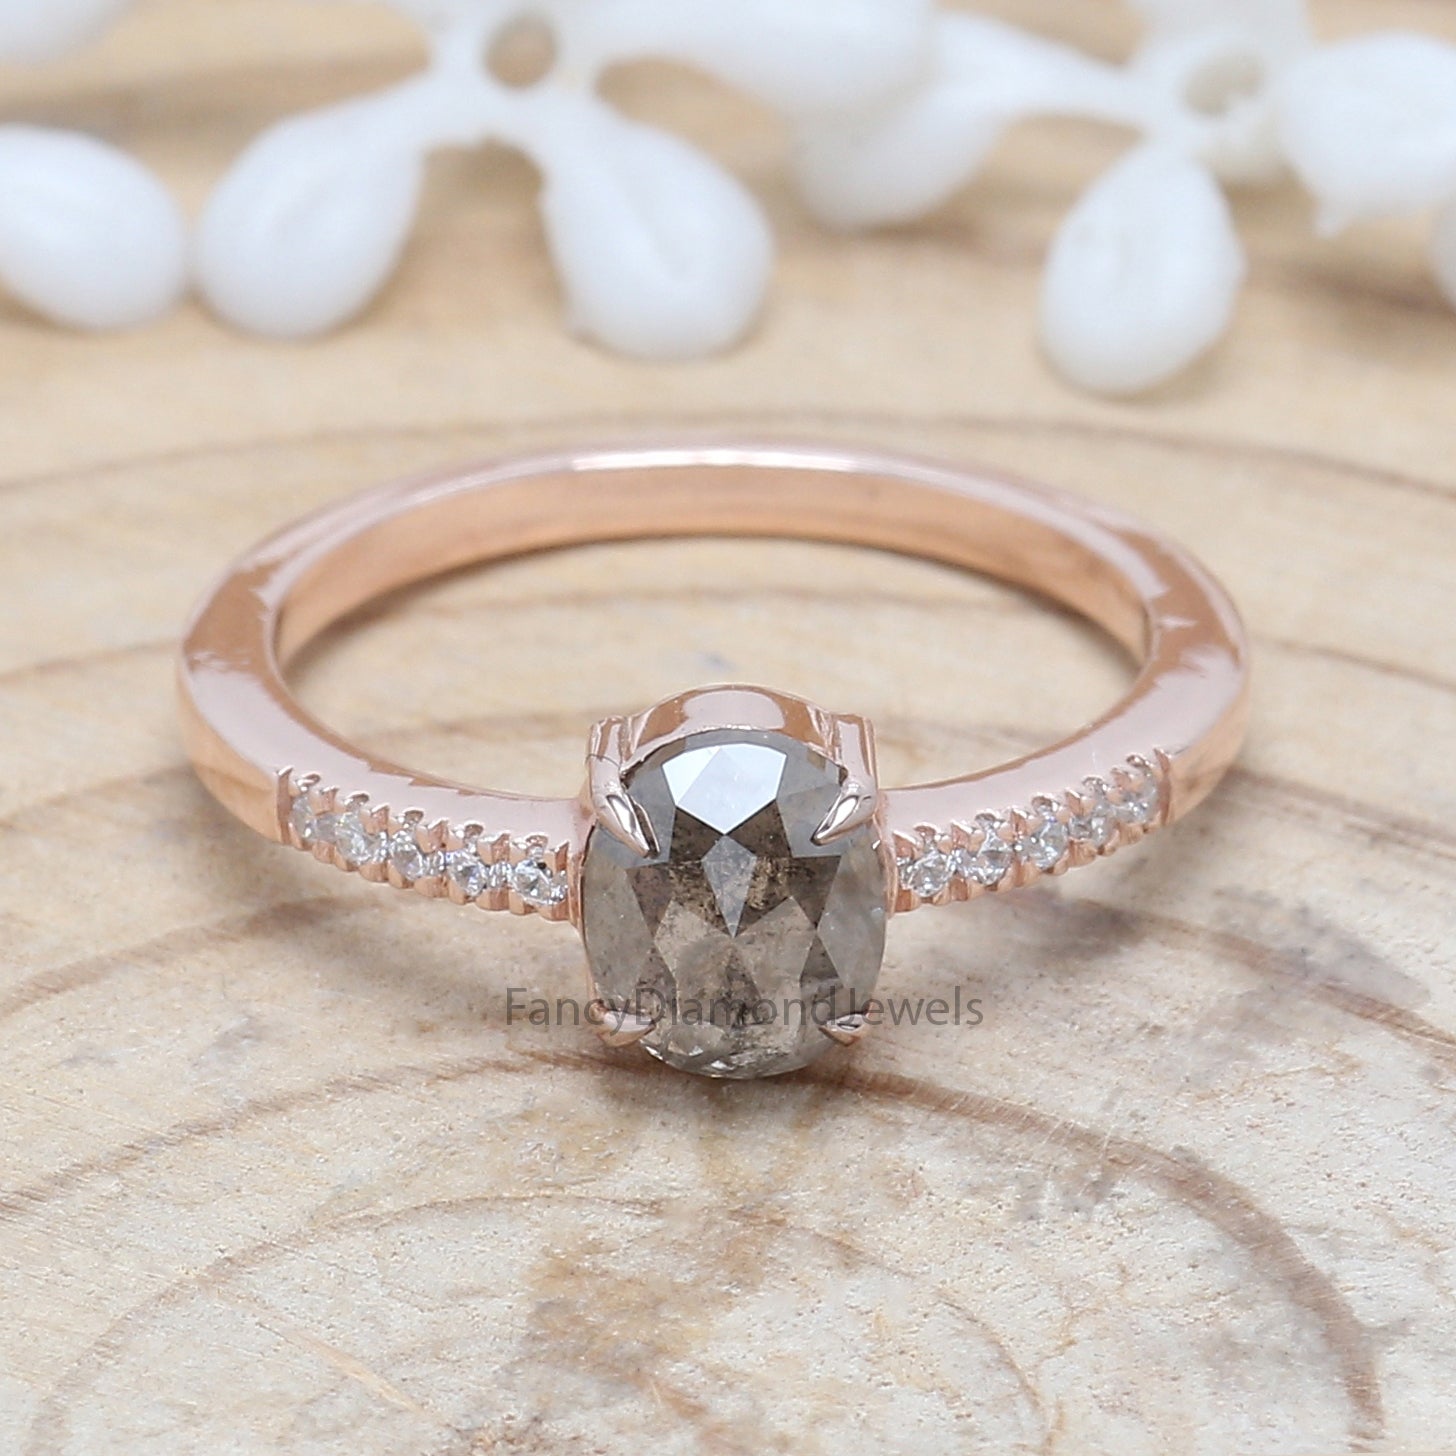 Oval Cut Salt And Pepper Diamond Ring 1.17 Ct 6.70 MM Oval Diamond Ring 14K Solid Rose Gold Silver Oval Engagement Ring Gift For Her QL8693